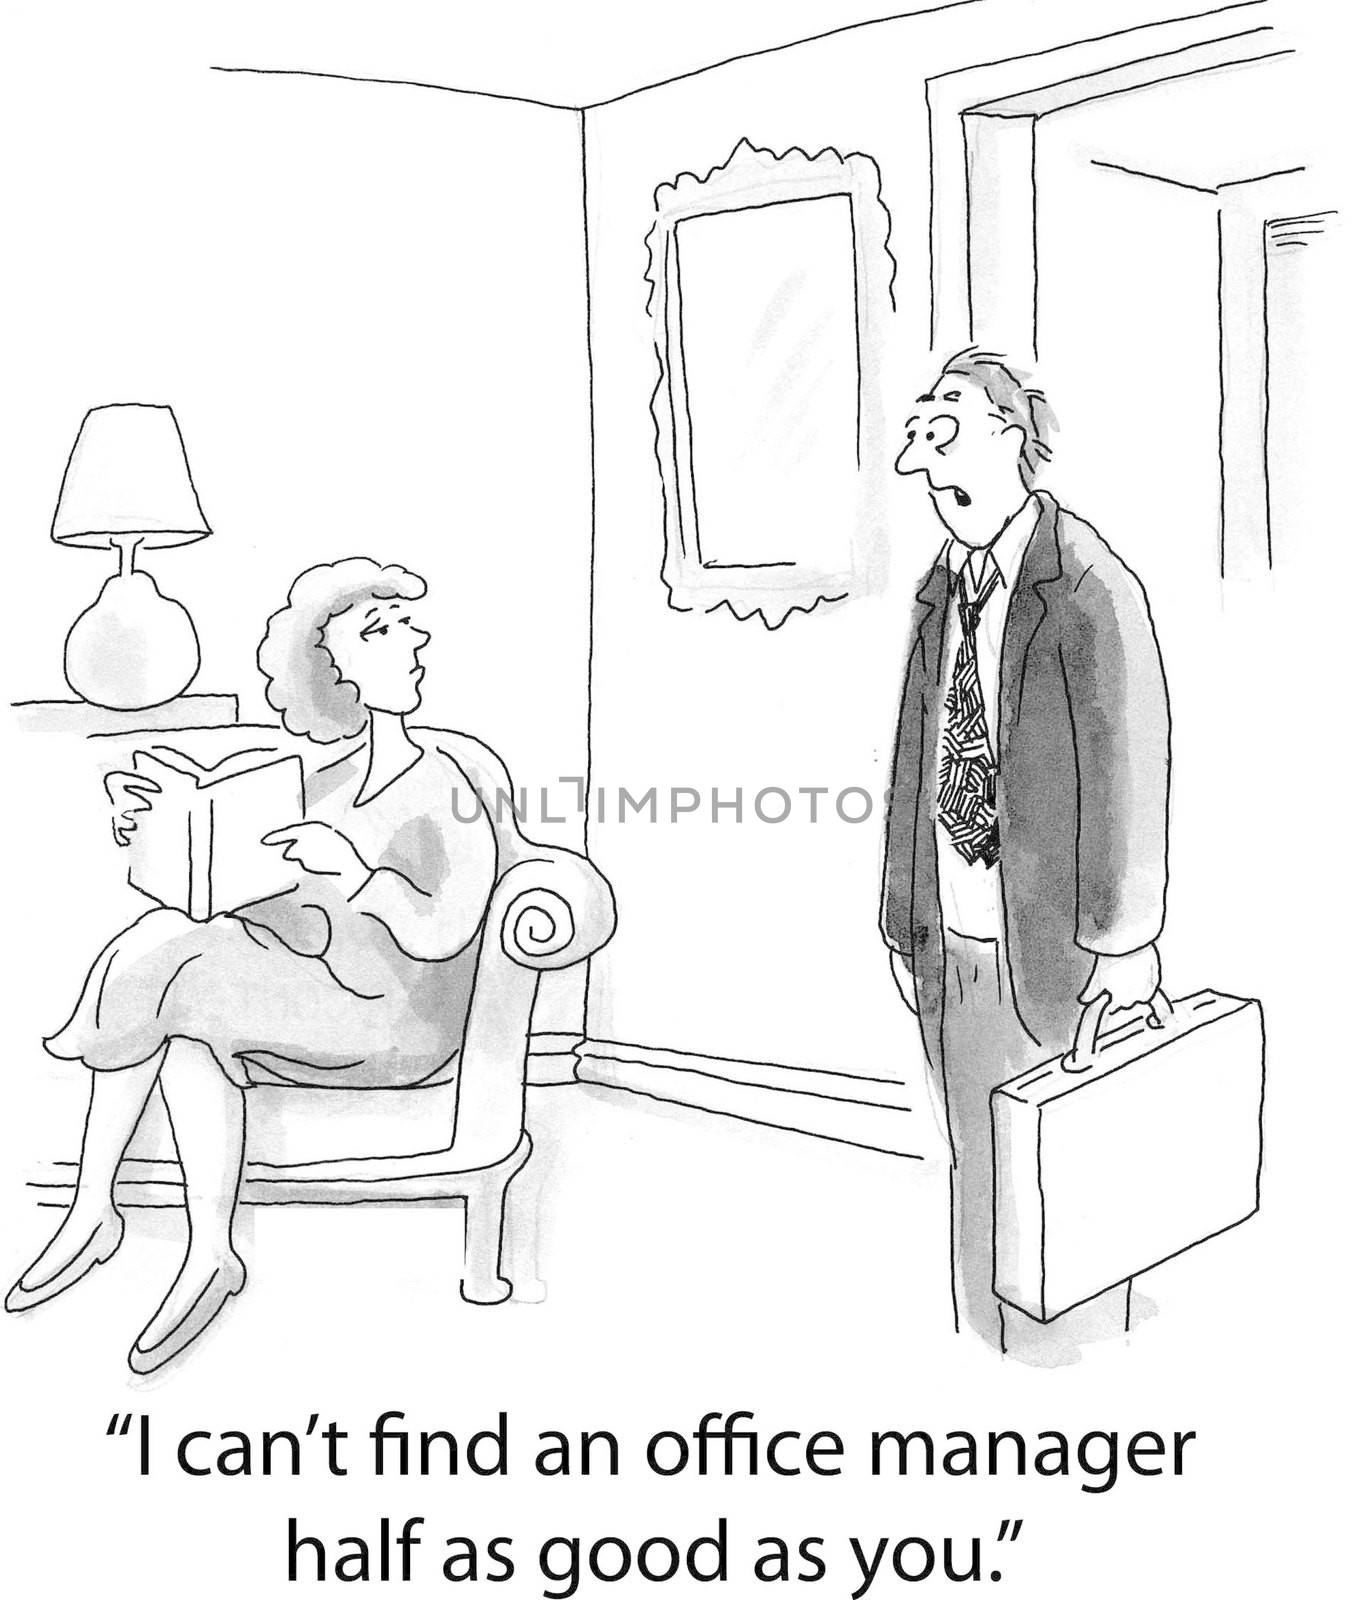 "I can't find an office manager half as good as you."